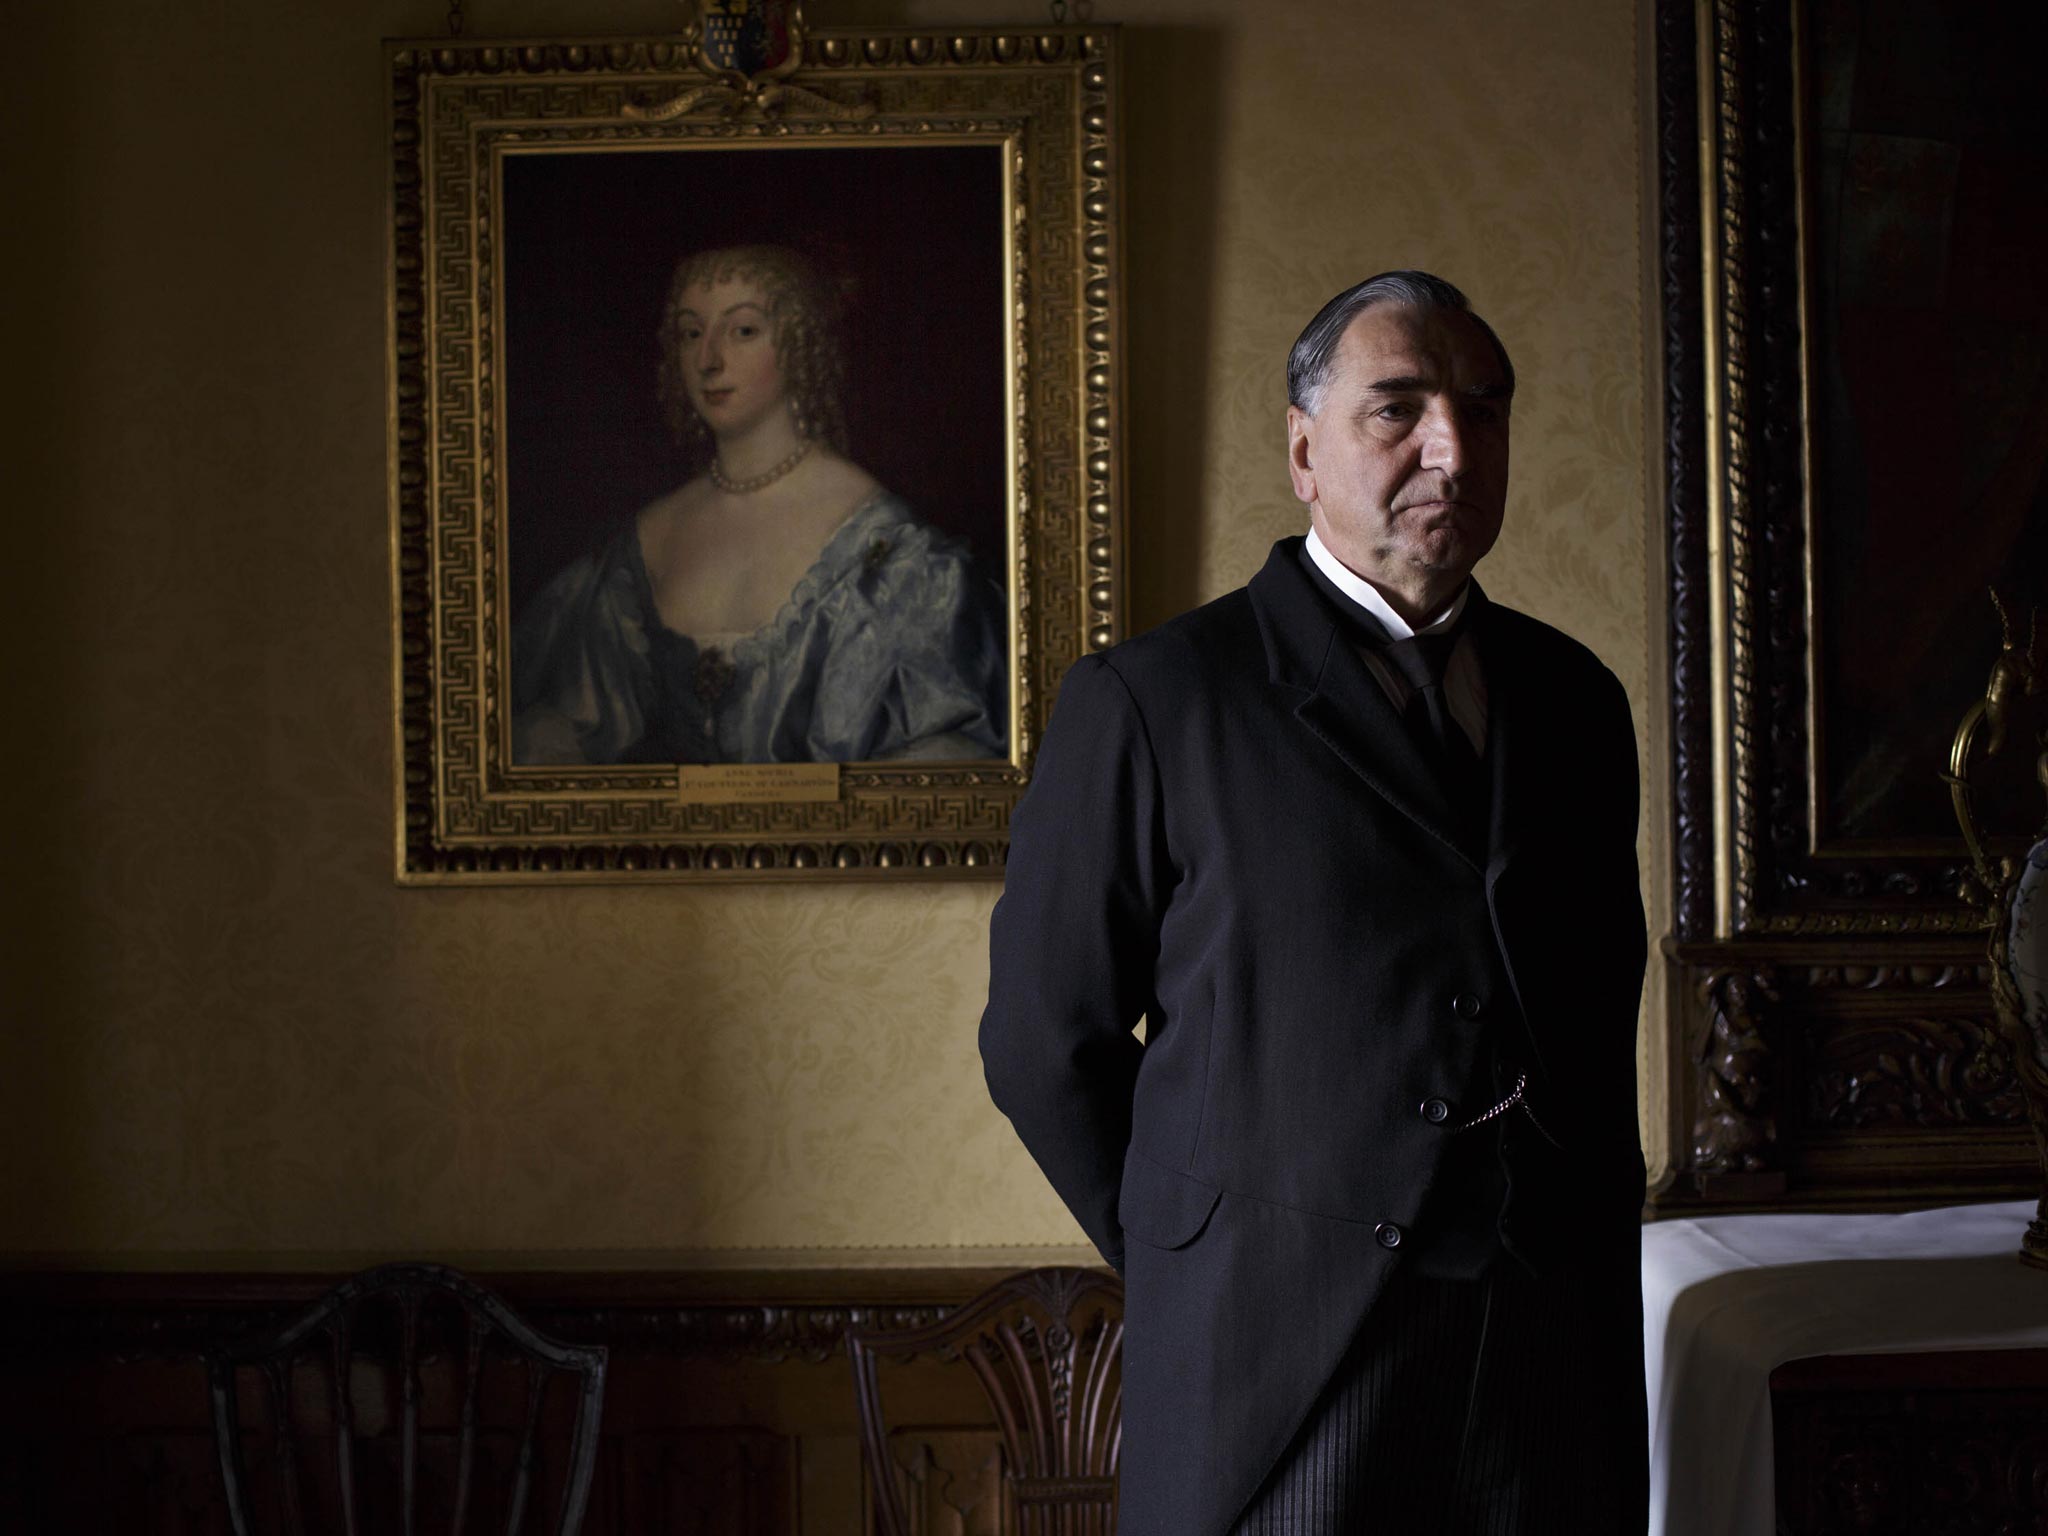 Dowton Abbey star Jim Carter slams “old Etonians” running the country